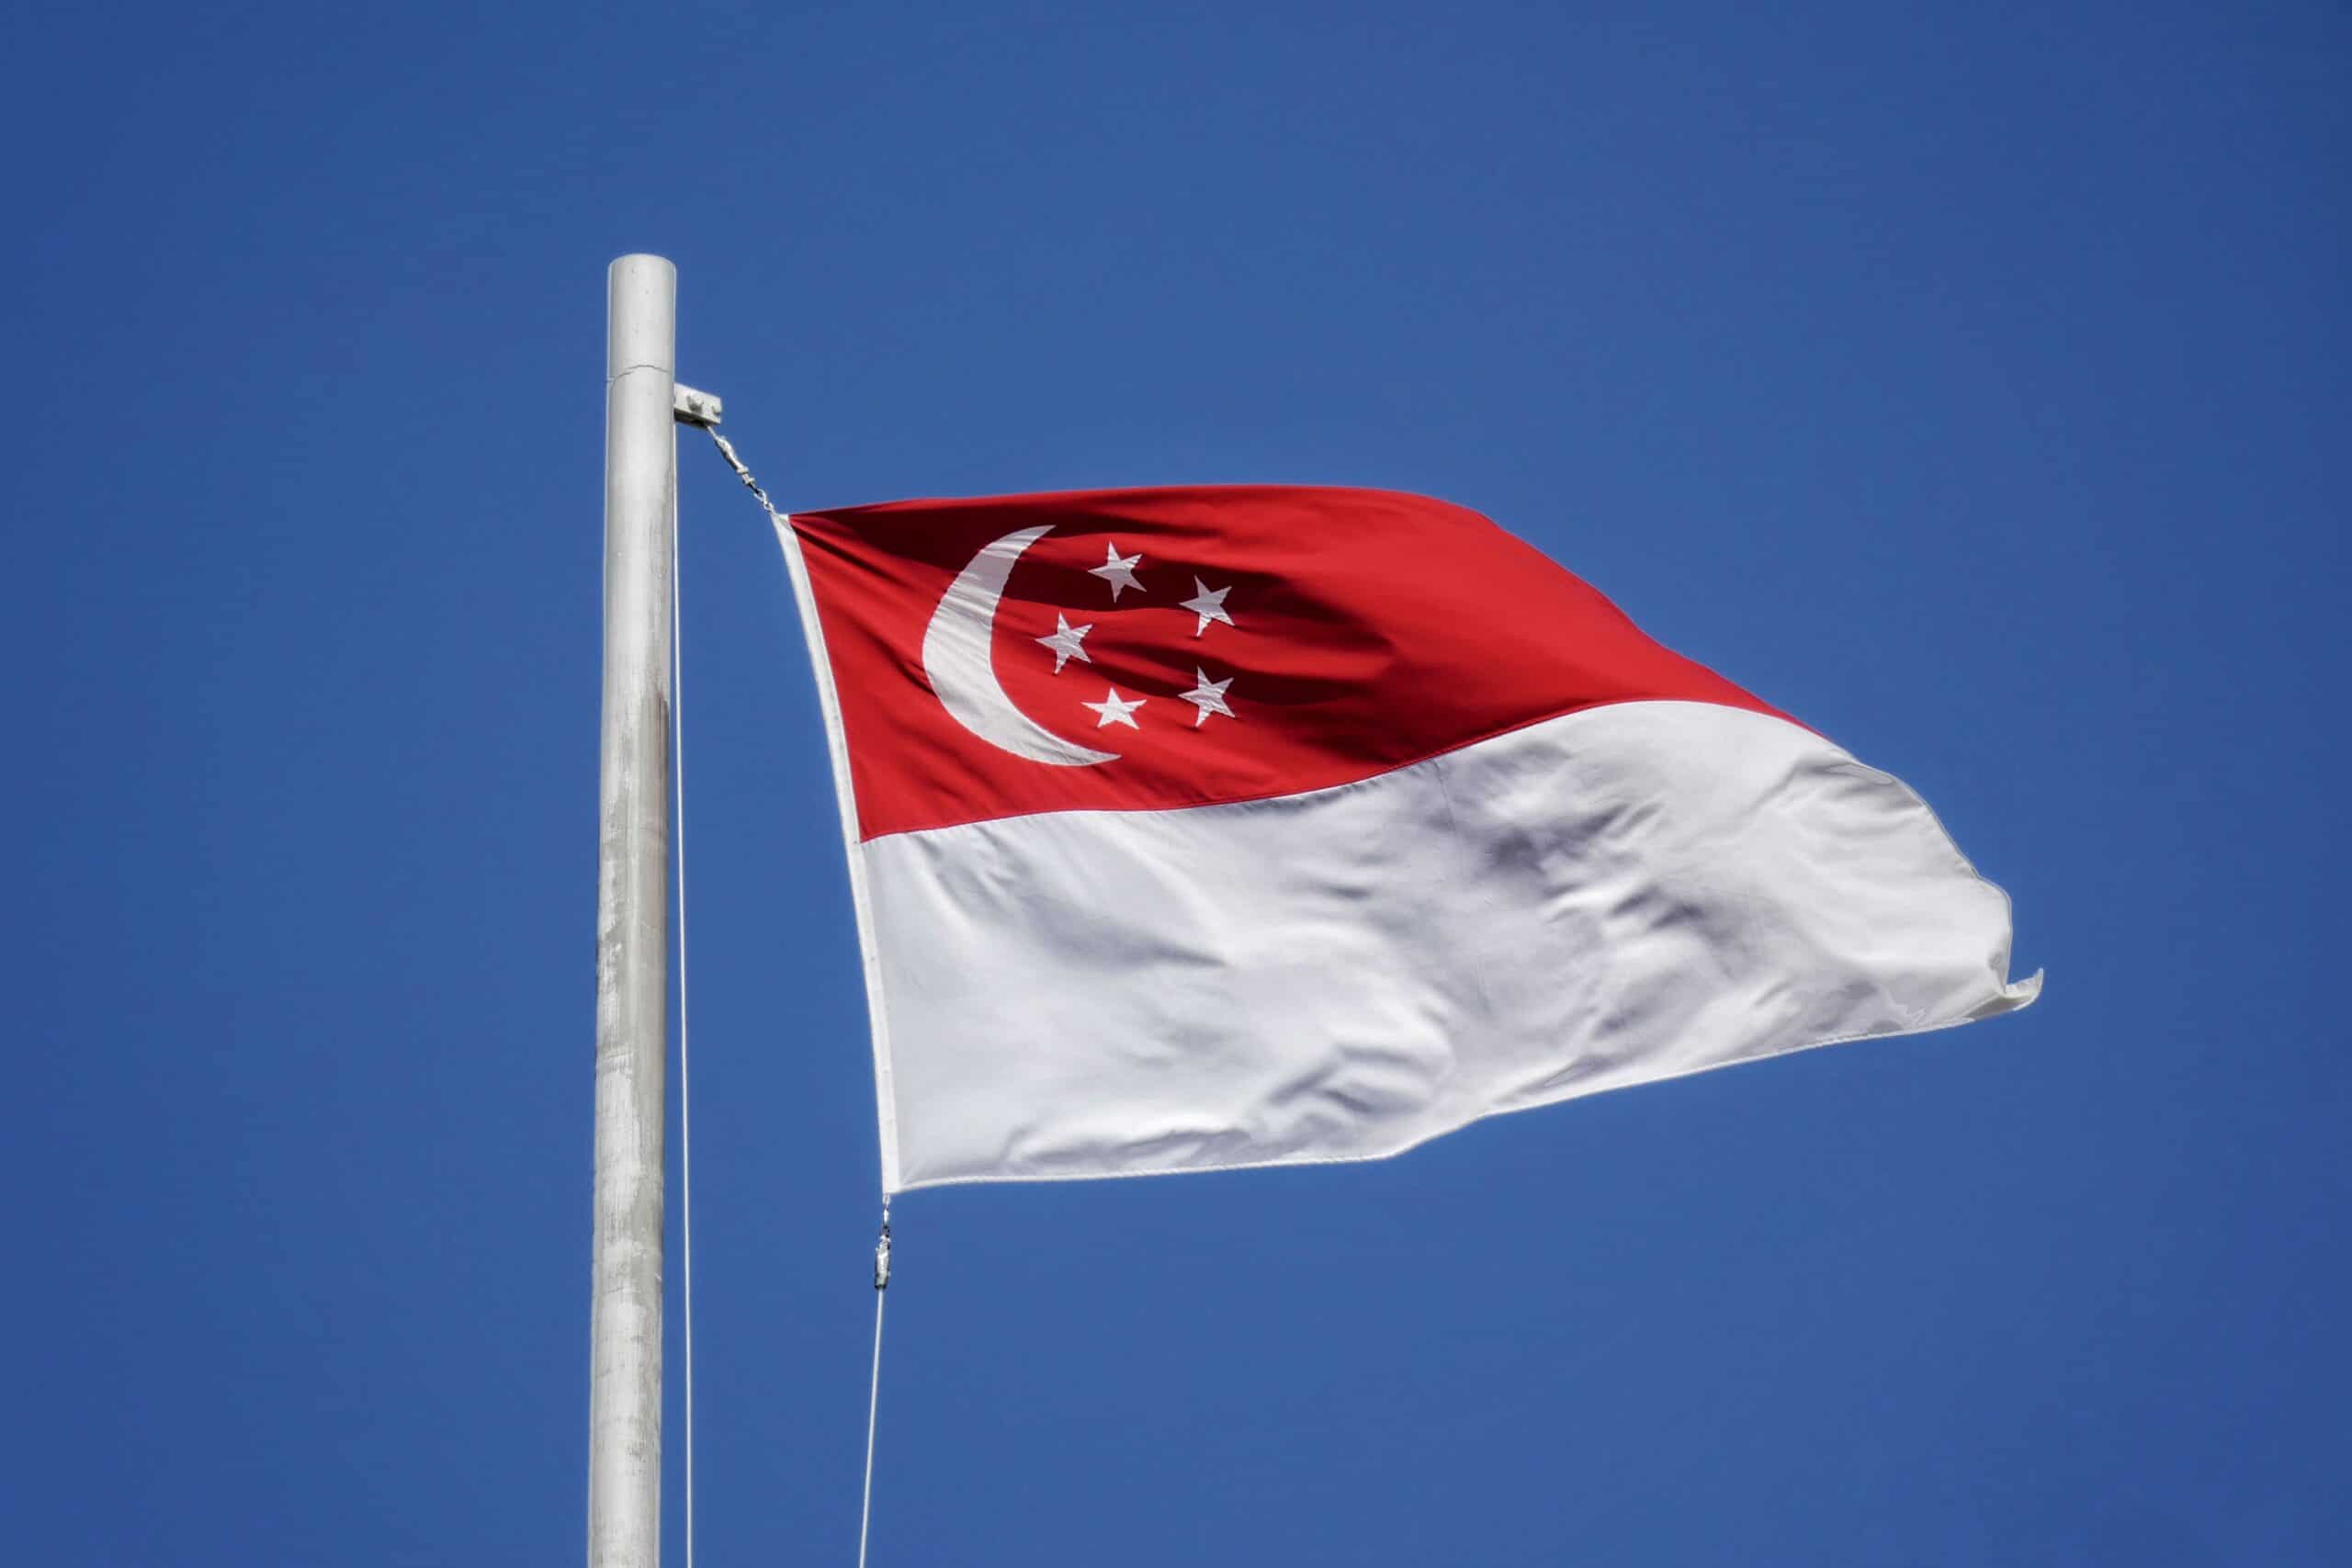 Singapore's new restrictions